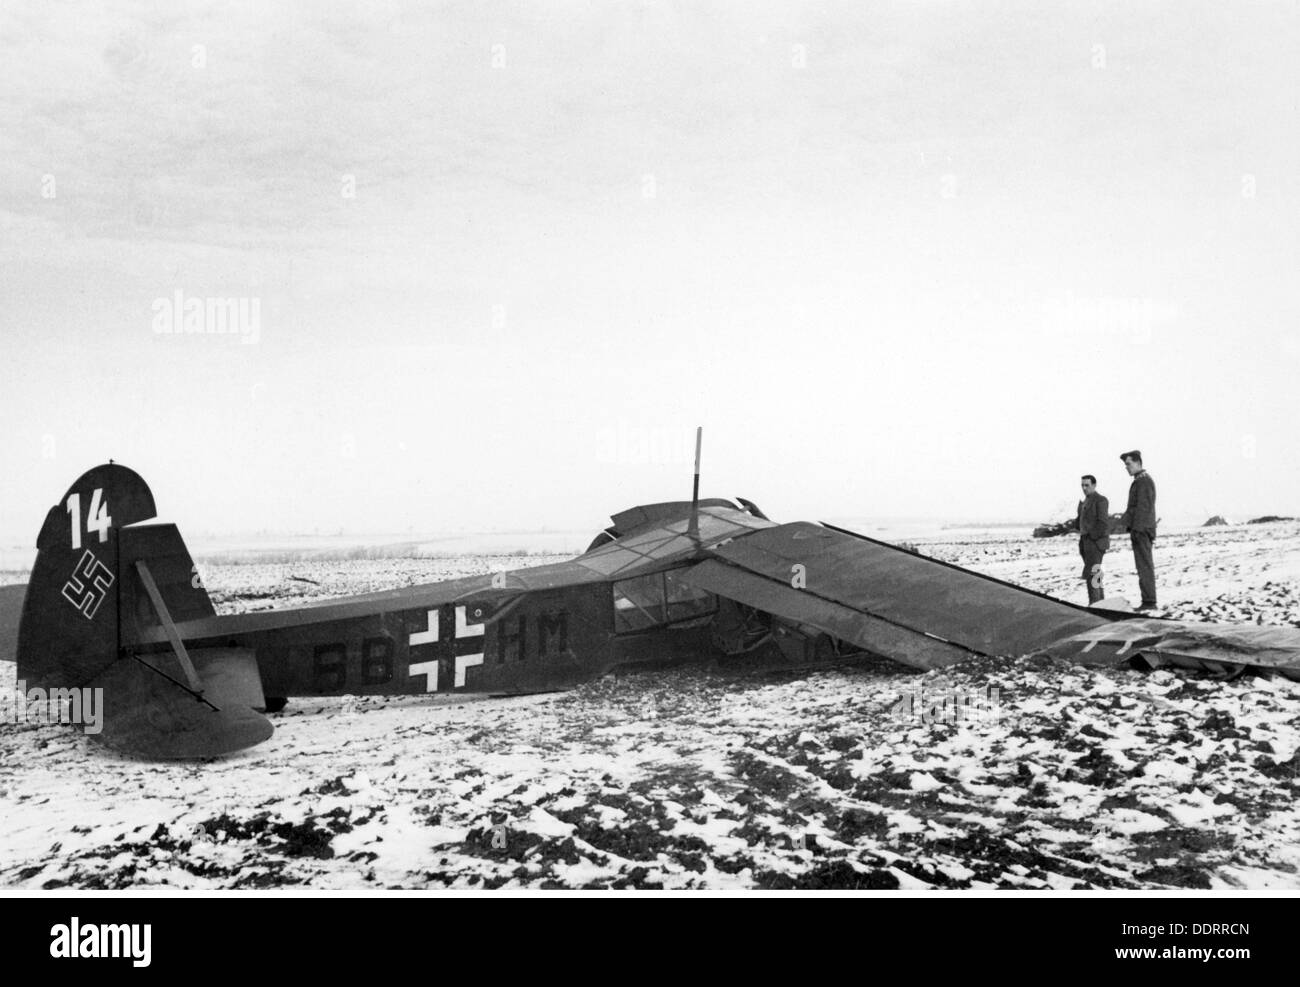 Second World War / WWII, aerial warfare, France, crashed German liaison aircraft type Fieseler Fi 156 'Storch', near Amiens, 23.2.1941, Additional-Rights-Clearences-Not Available Stock Photo